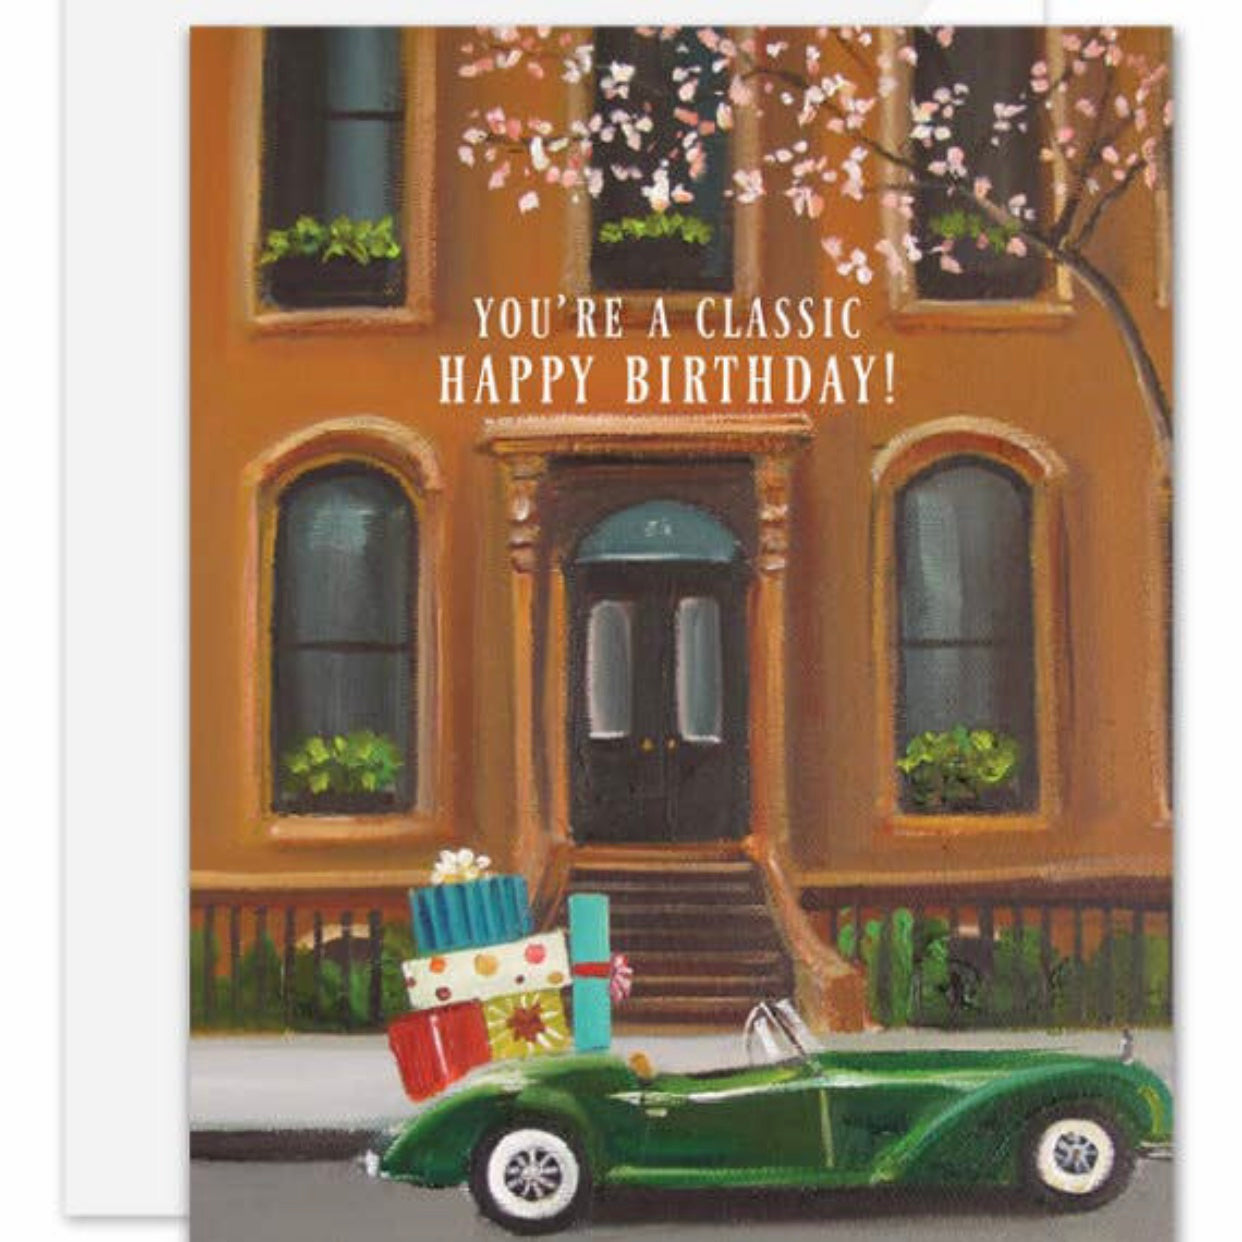 you're a classic happy birthday greeting card